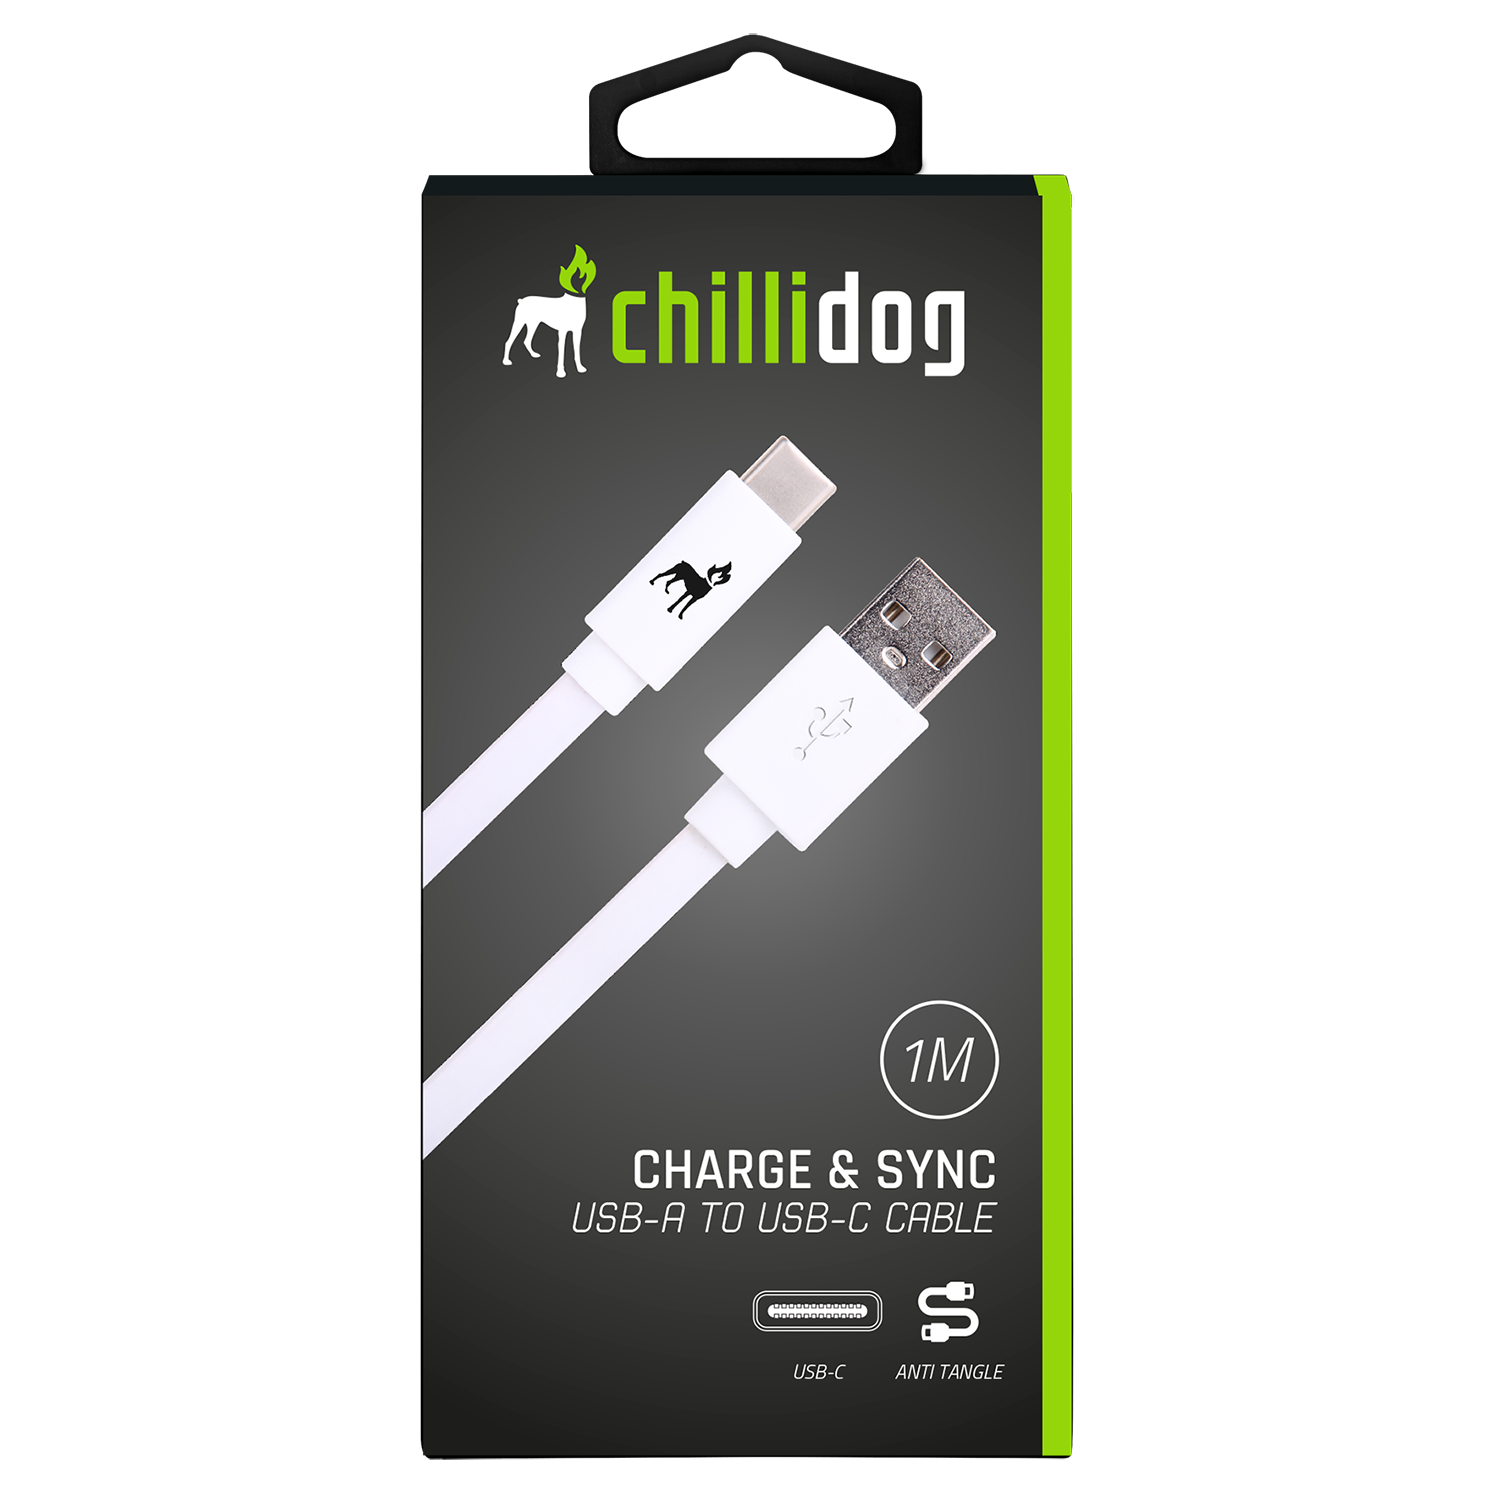 Chillidog USB-C To USB-A Cable White 1M